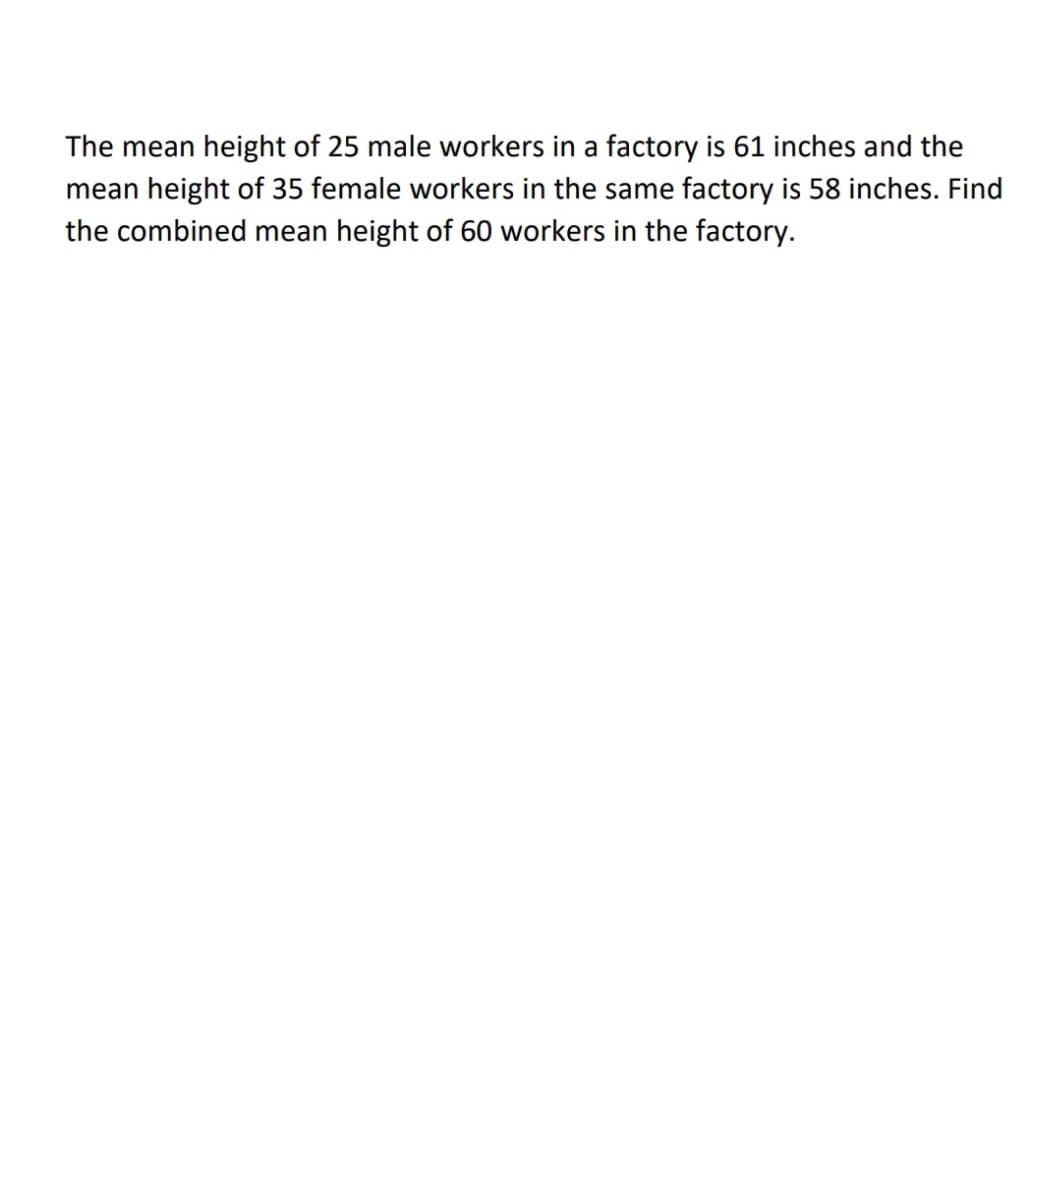 The mean height of 25 male workers in a factory is 61 inches and the
mean height of 35 female workers in the same factory is 58 inches. Find
the combined mean height of 60 workers in the factory.
